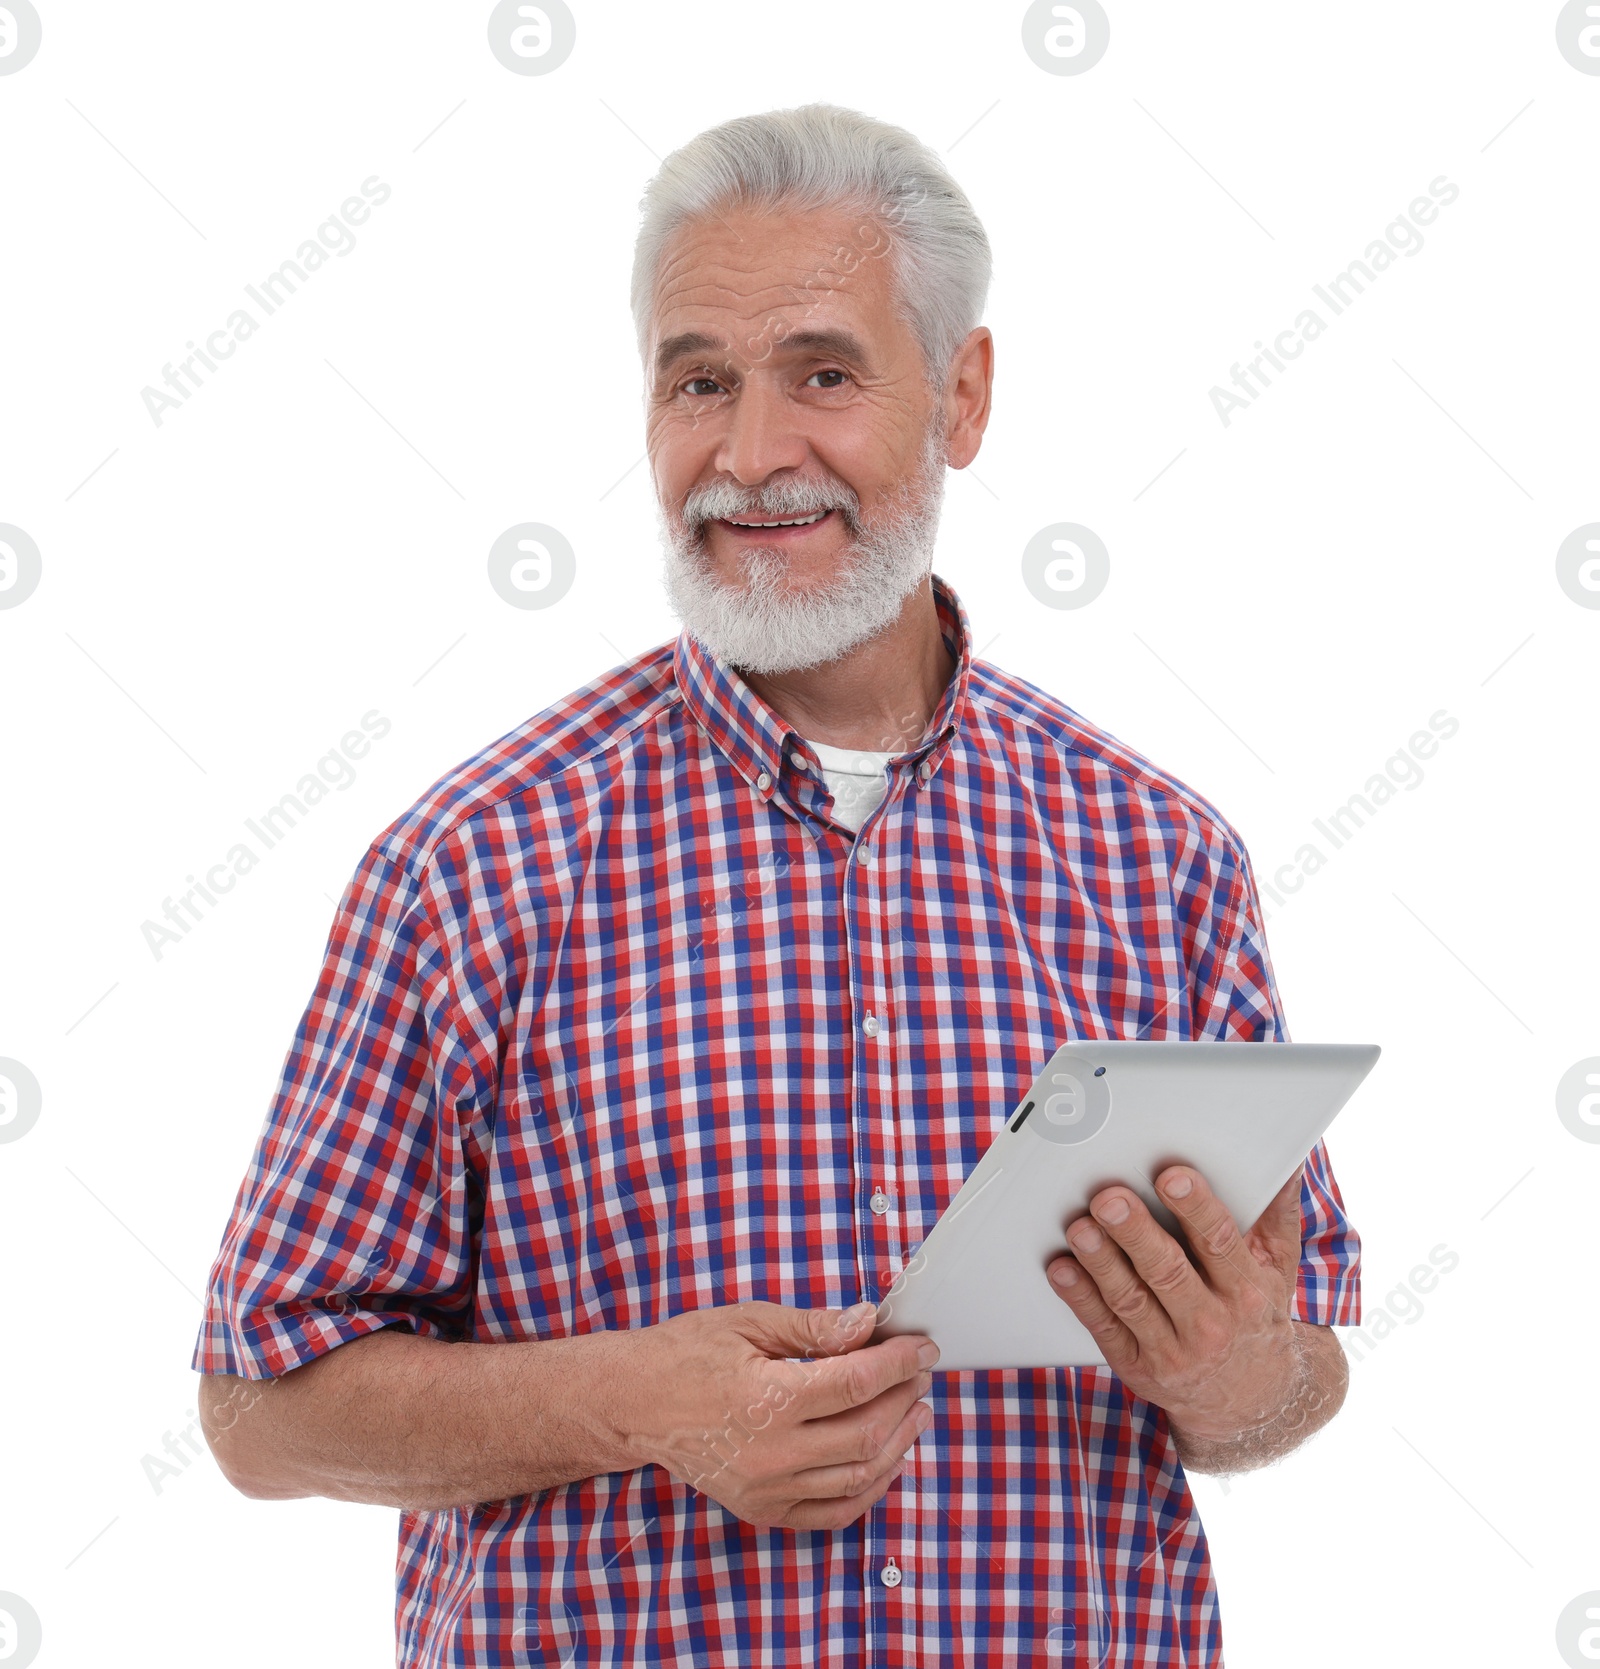 Photo of Smiling man with tablet on white background